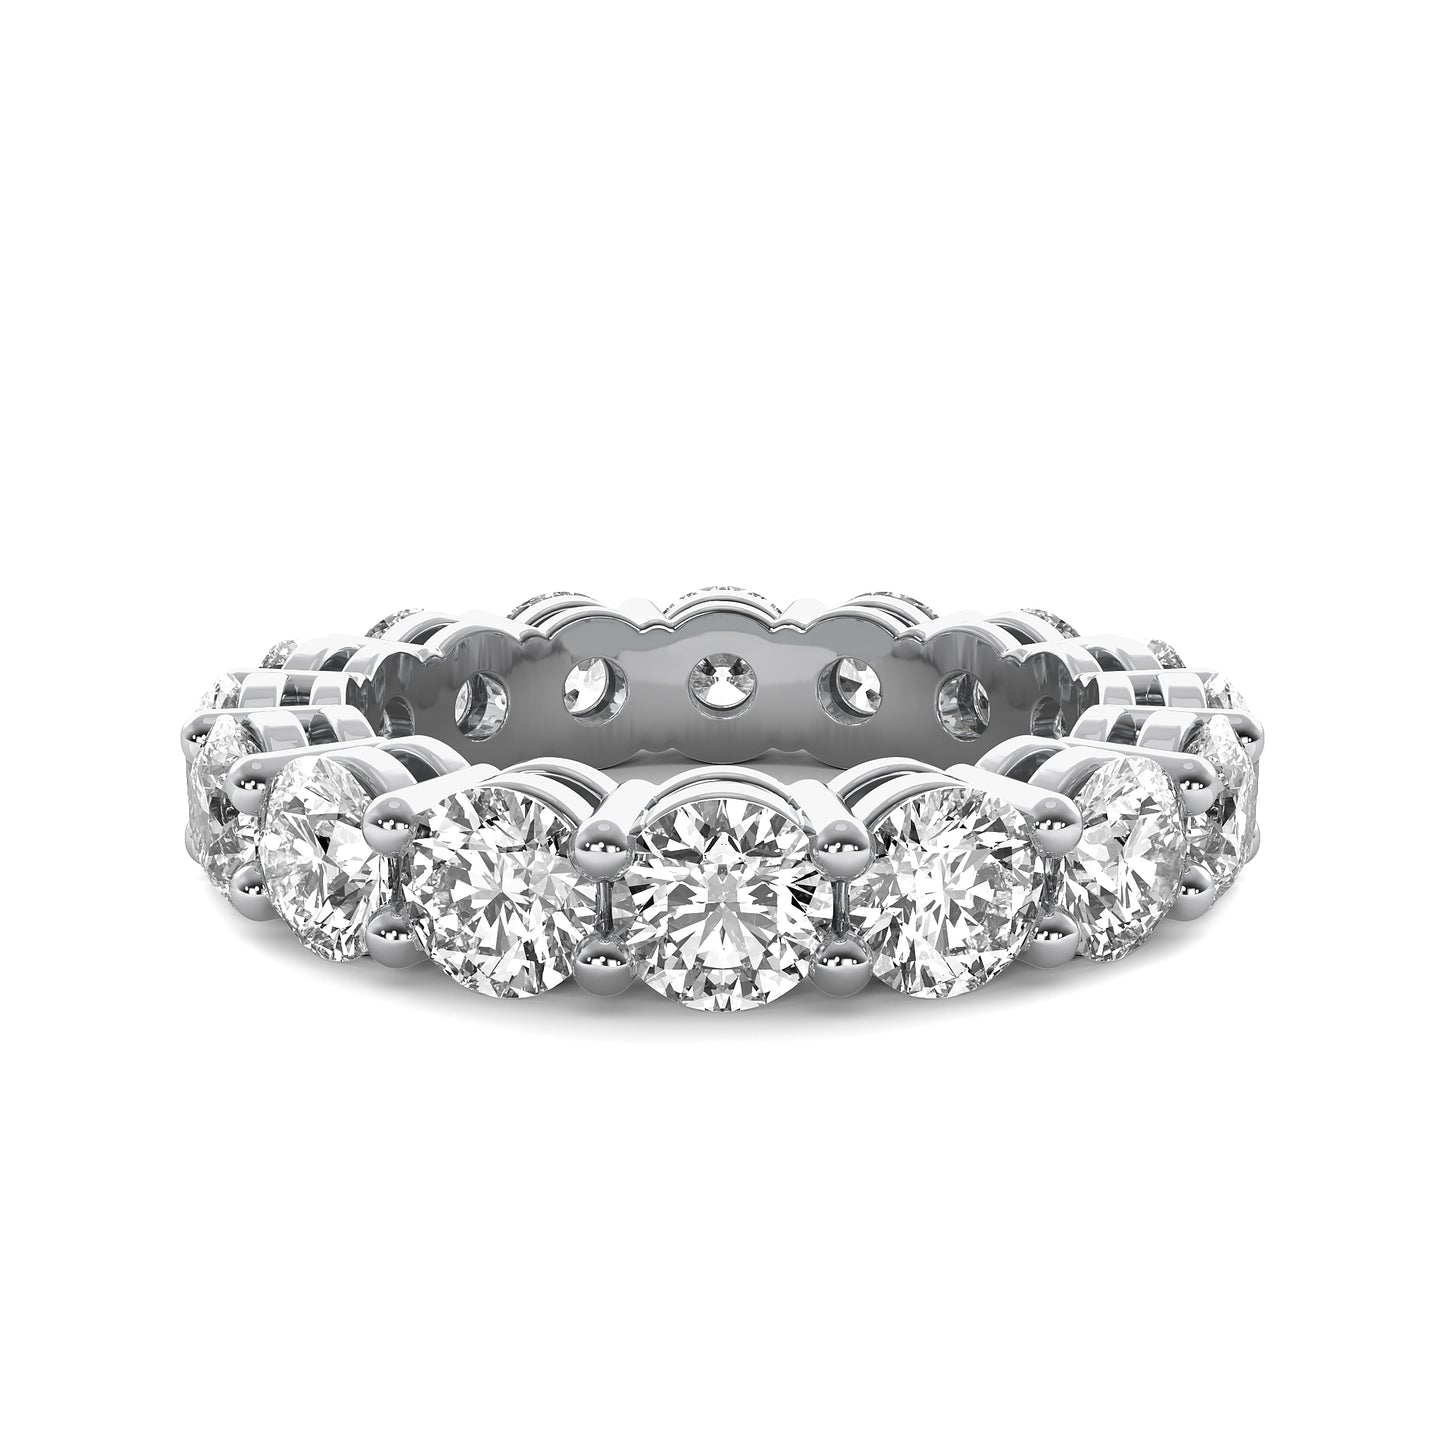 Lab Grown Diamond 14k Eternity Bands (This listing is for illustrative purposes only).